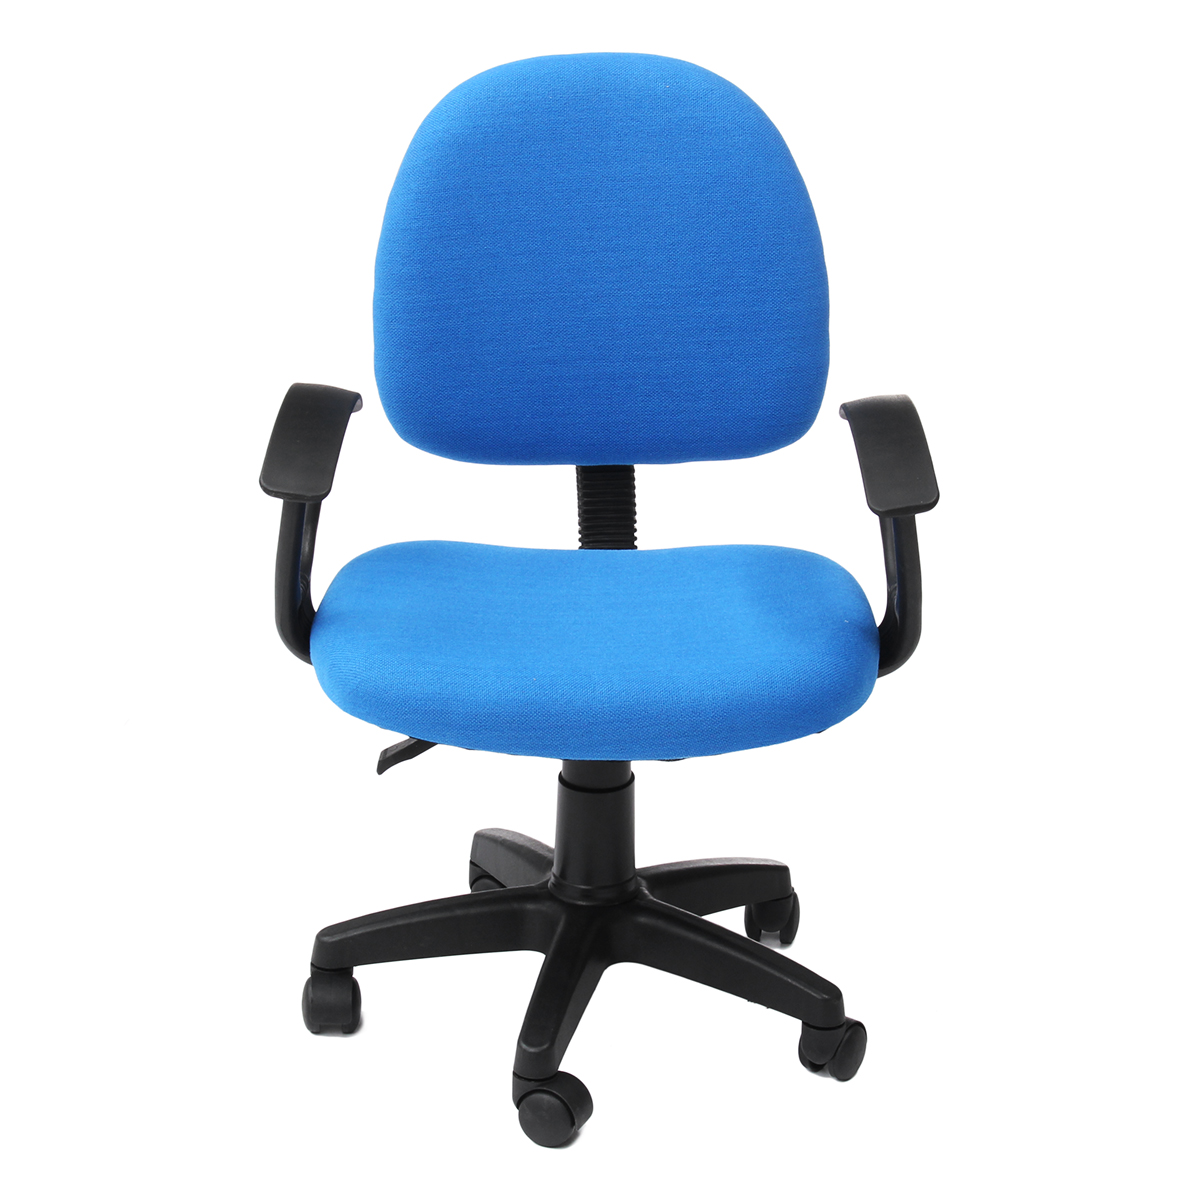 

Compact Office Chair Home Study Work Lift Rotary Chair Staff Seat Computer Laptop Desk Chair